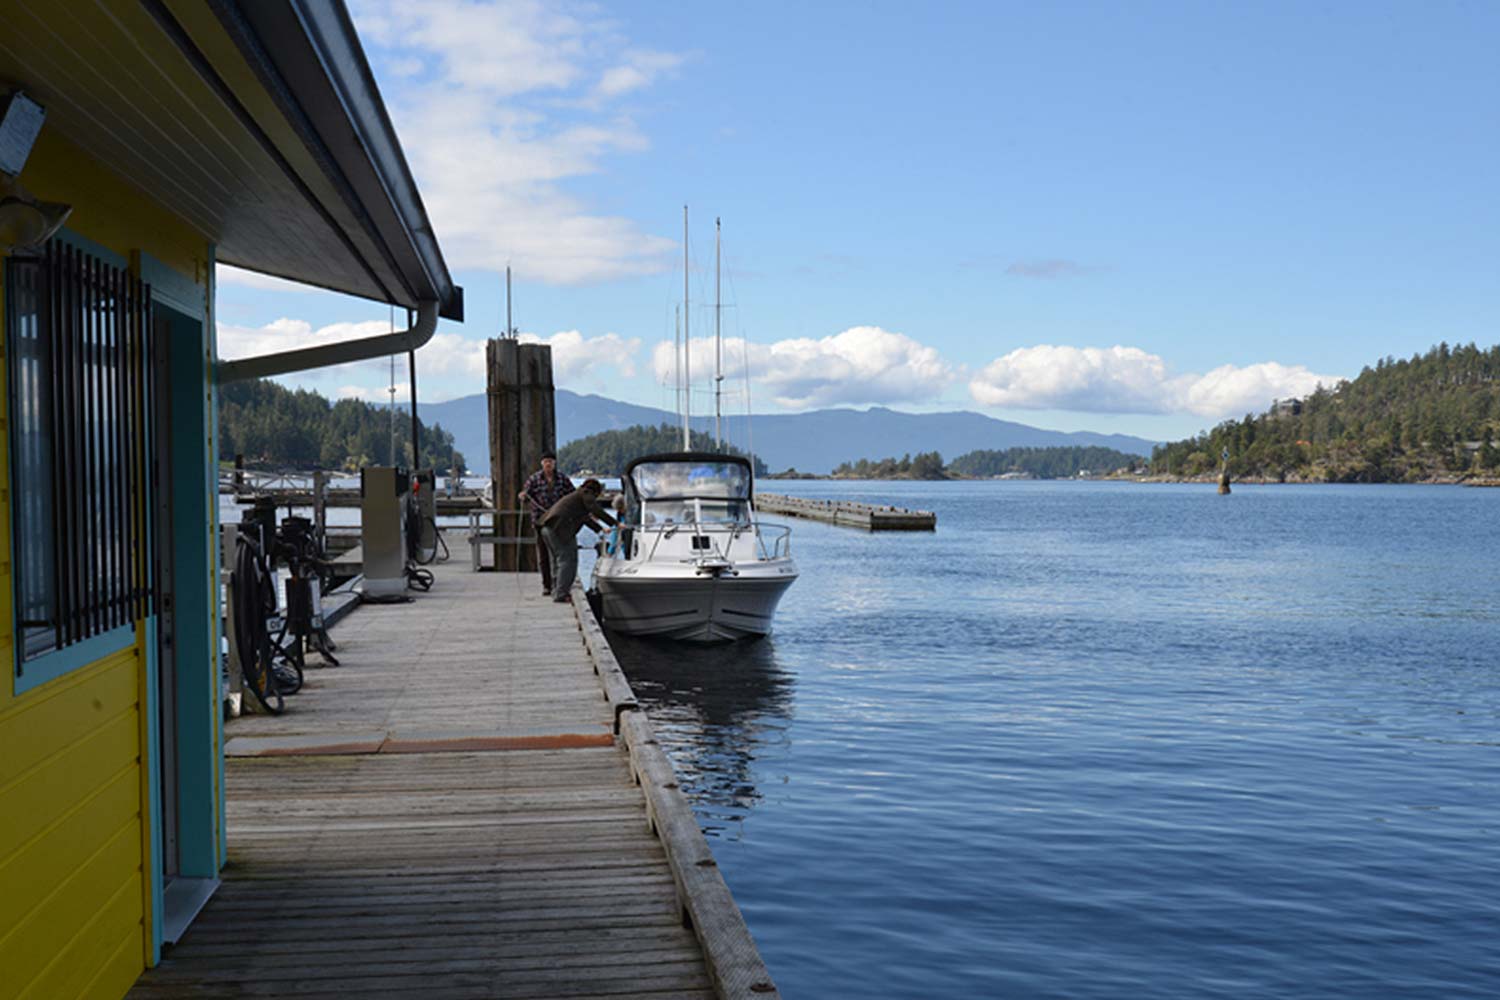 A boat awaits refuelling at the only Pender Harbour marine fuel dock. Commercial and recreational vessels use this fuel dock.